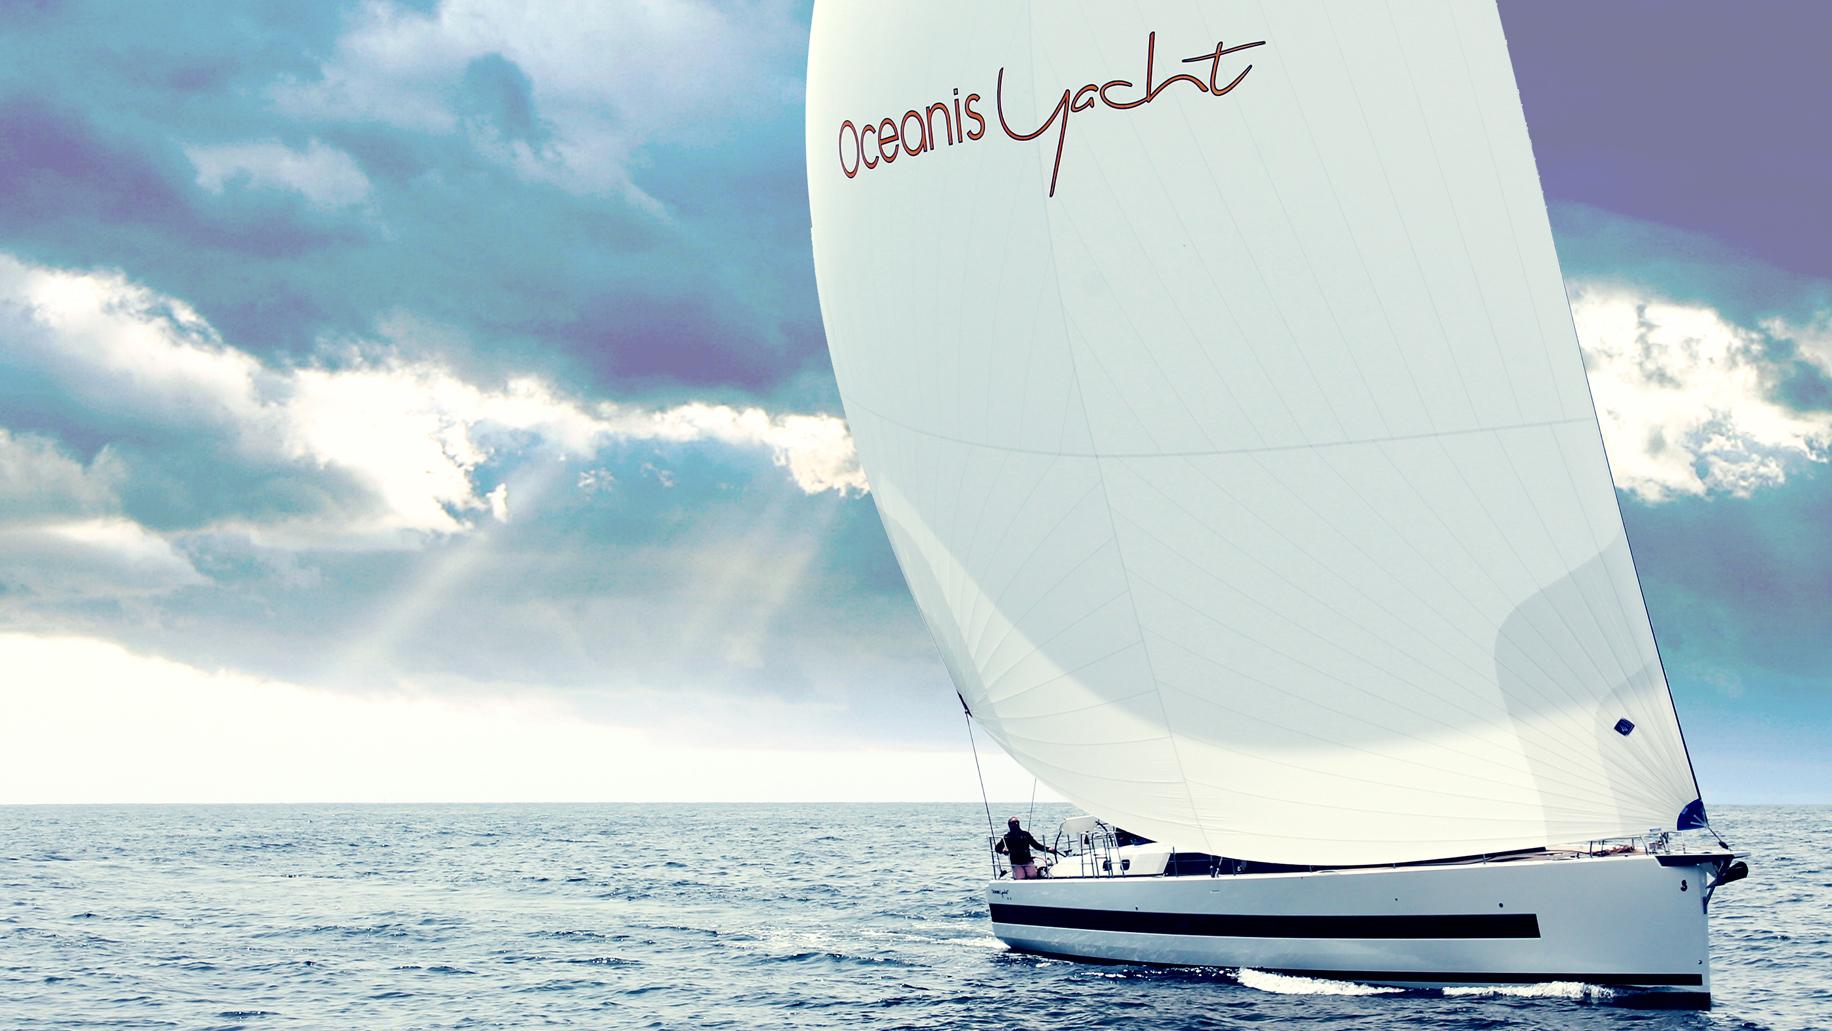 Where your “Yachting Experience” begins